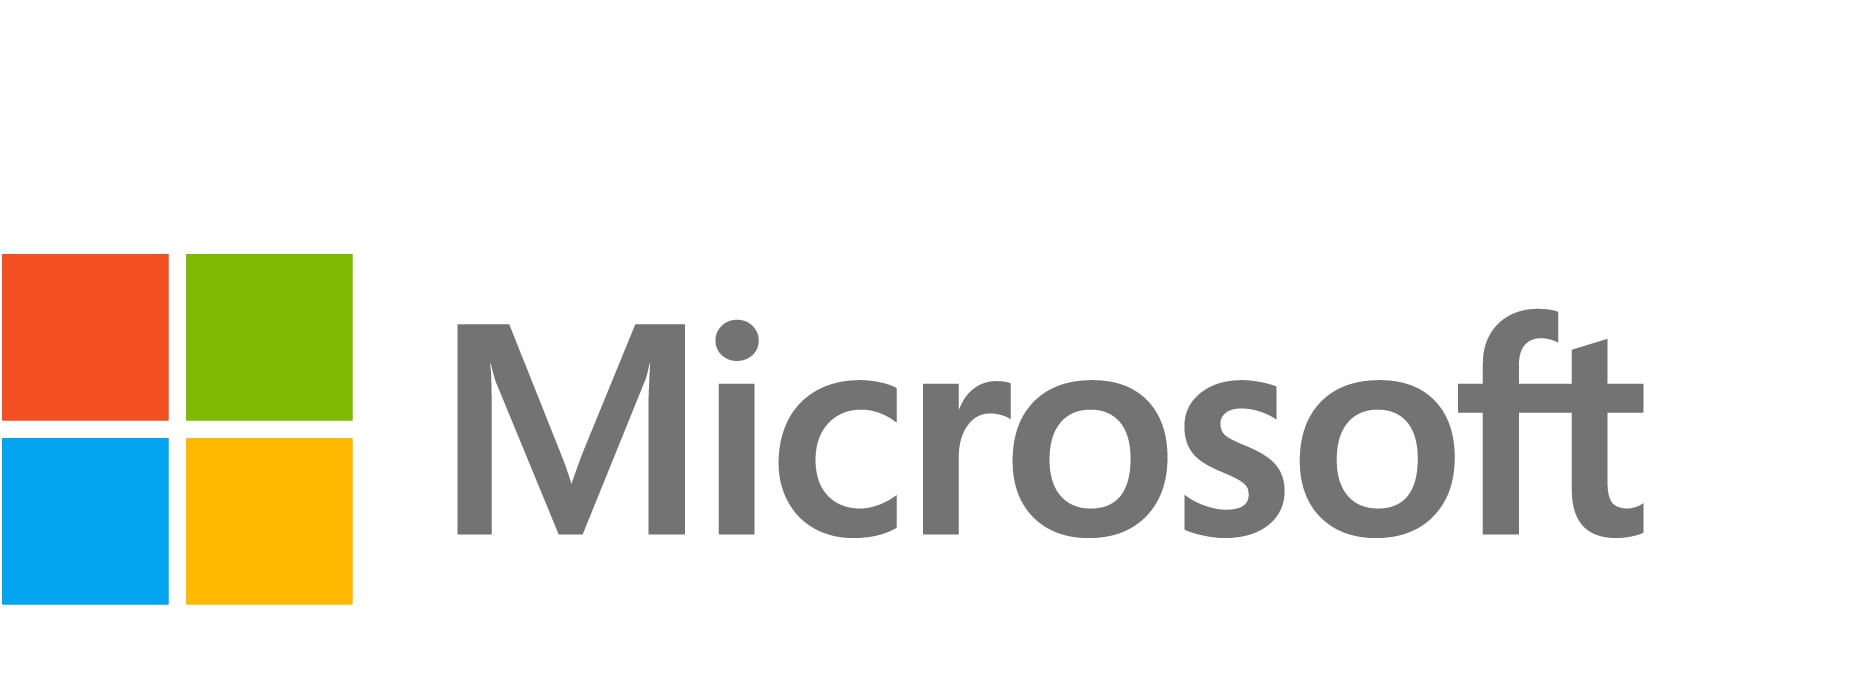 Microsoft Power Pages - subscription license (1 month) - 500 anonymous users per web site